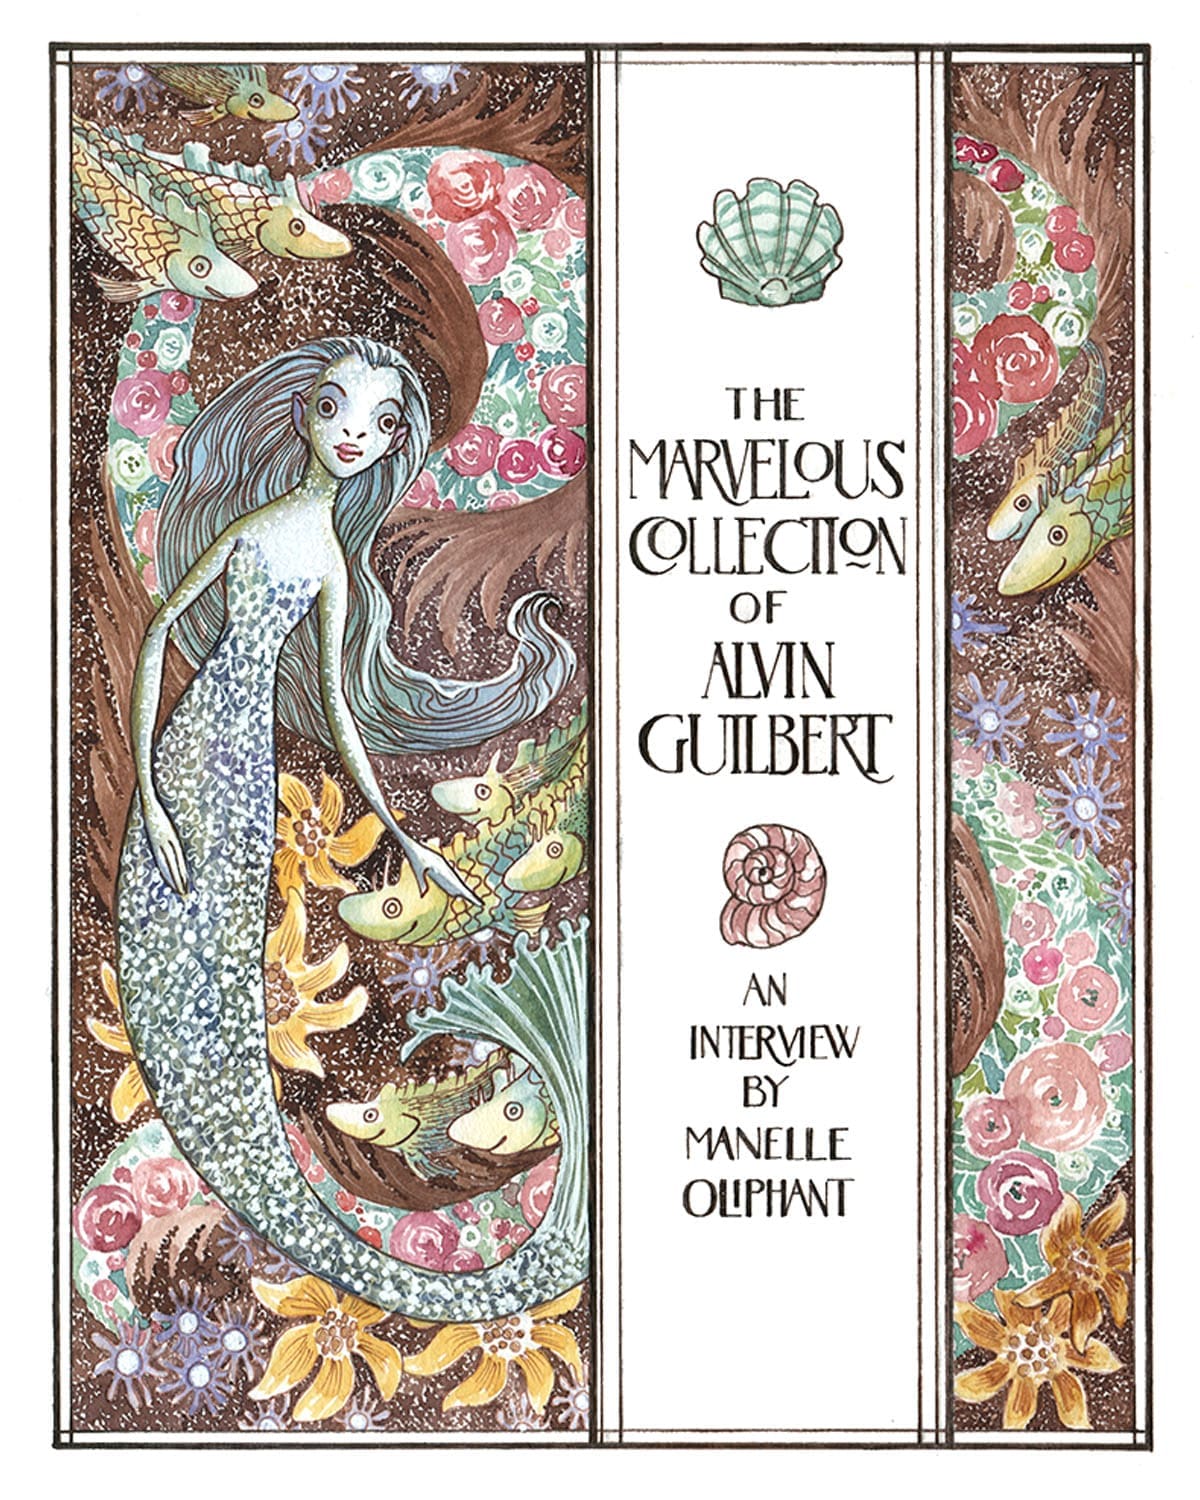 The Marvelous Collection of Alvin Guilbert